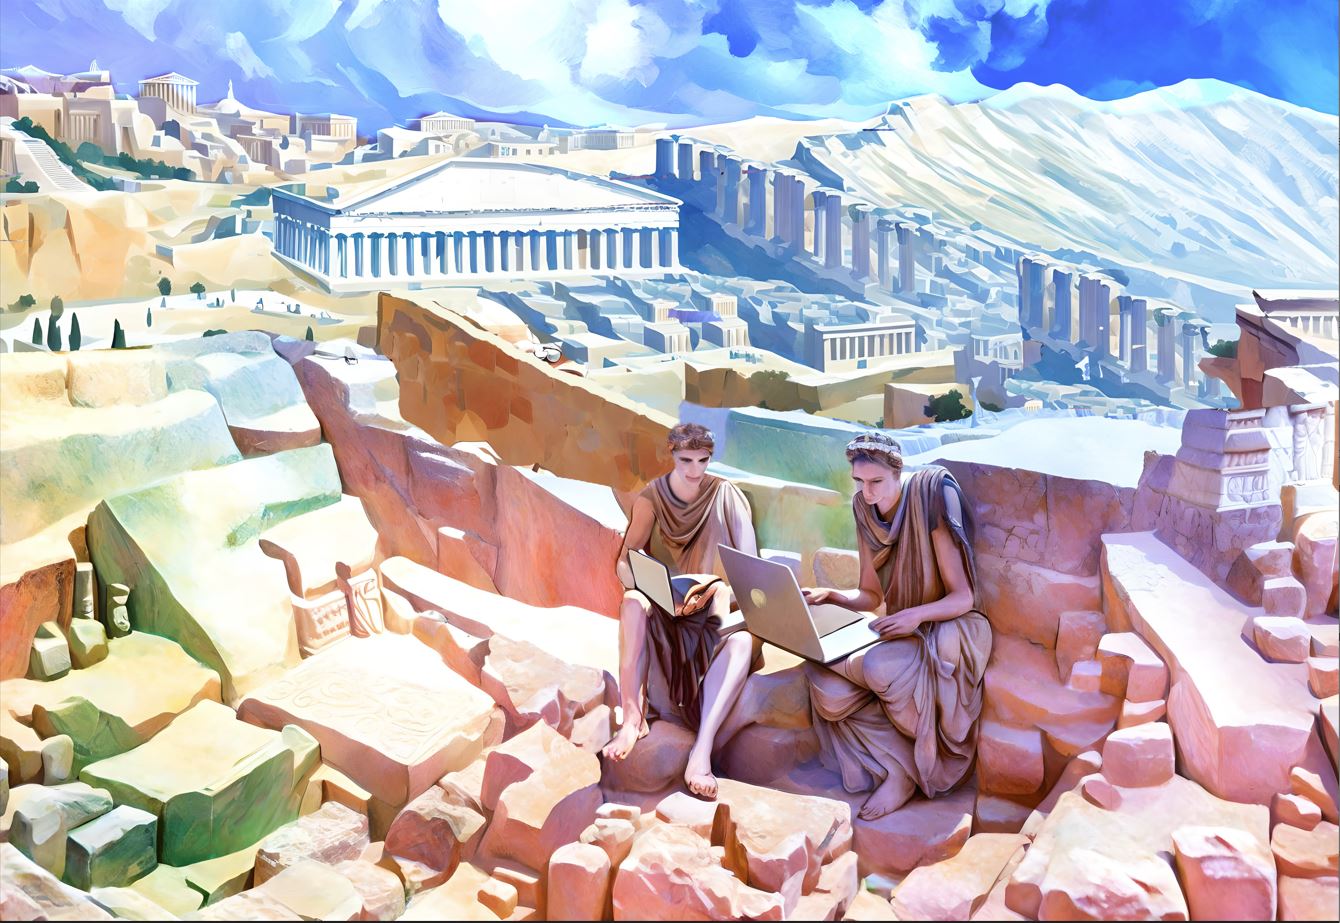 'Laptops by the Acropolis’ by Gil and Natalie Dekel and image-generating AI, 2023.